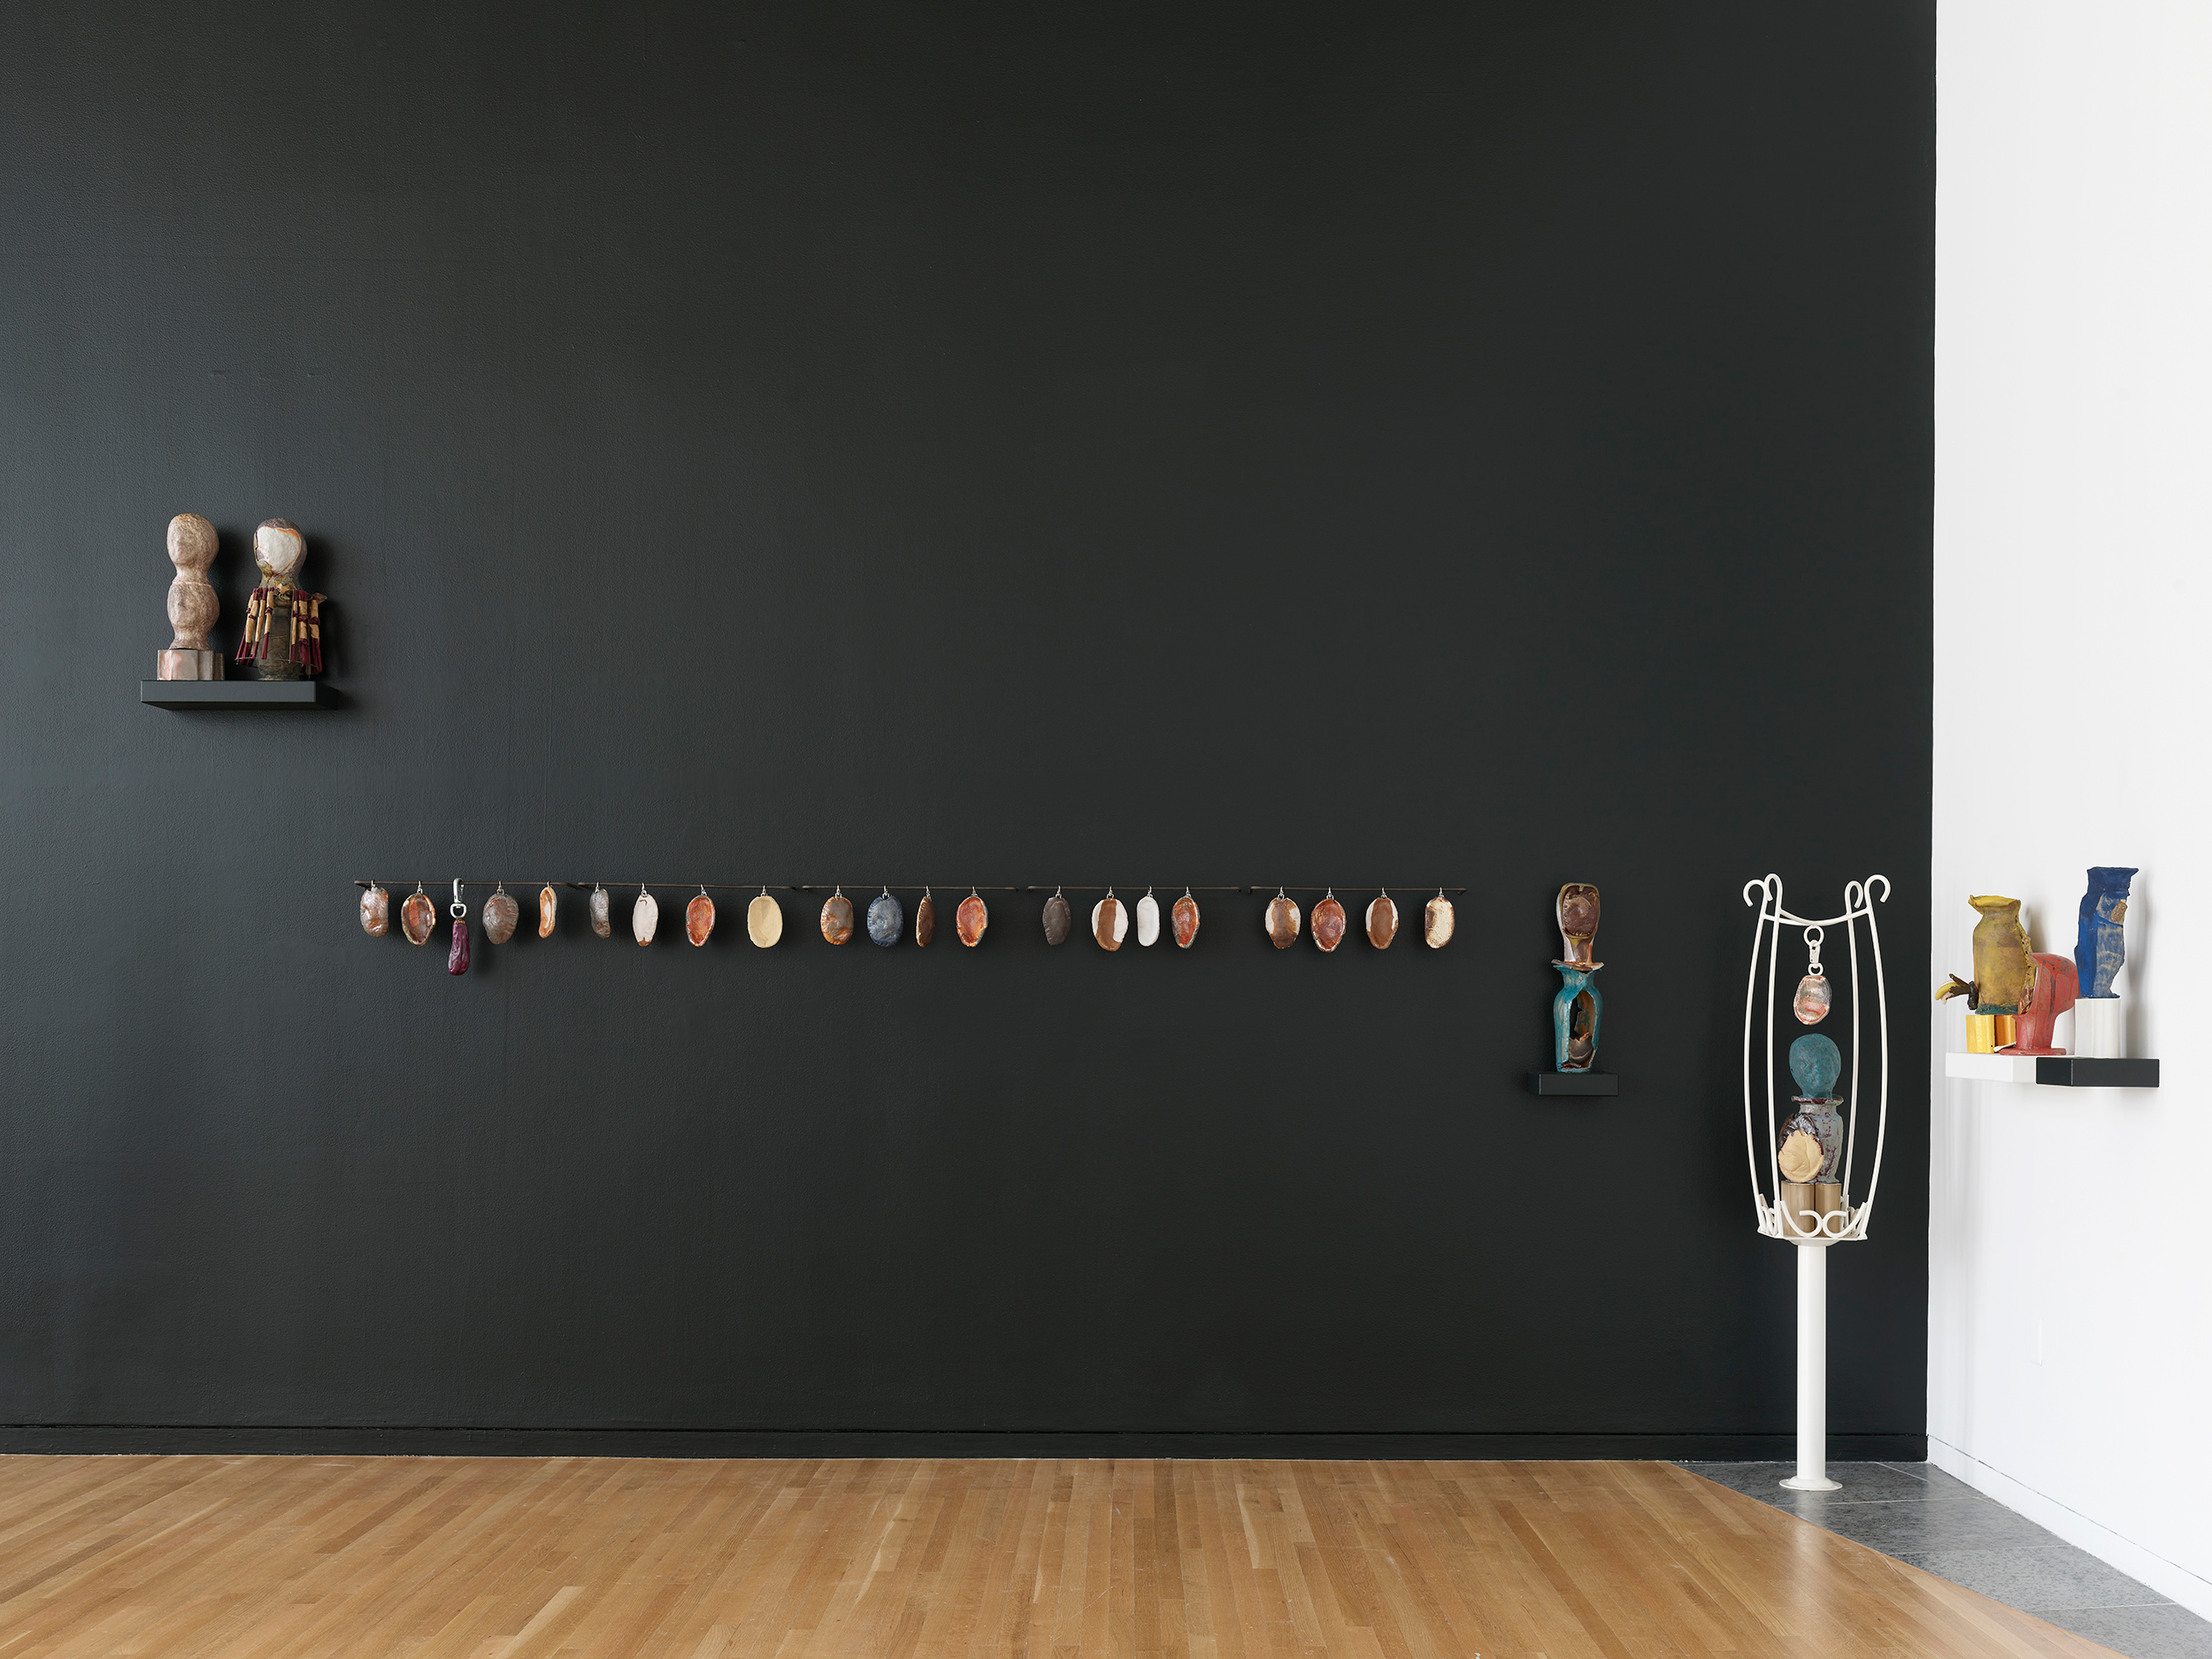 Figurative sculptures on a shelf above a row of earth-toned ceramic pitas, next to multicolored vases and a white columnar and wire pedestal holding sculptures.